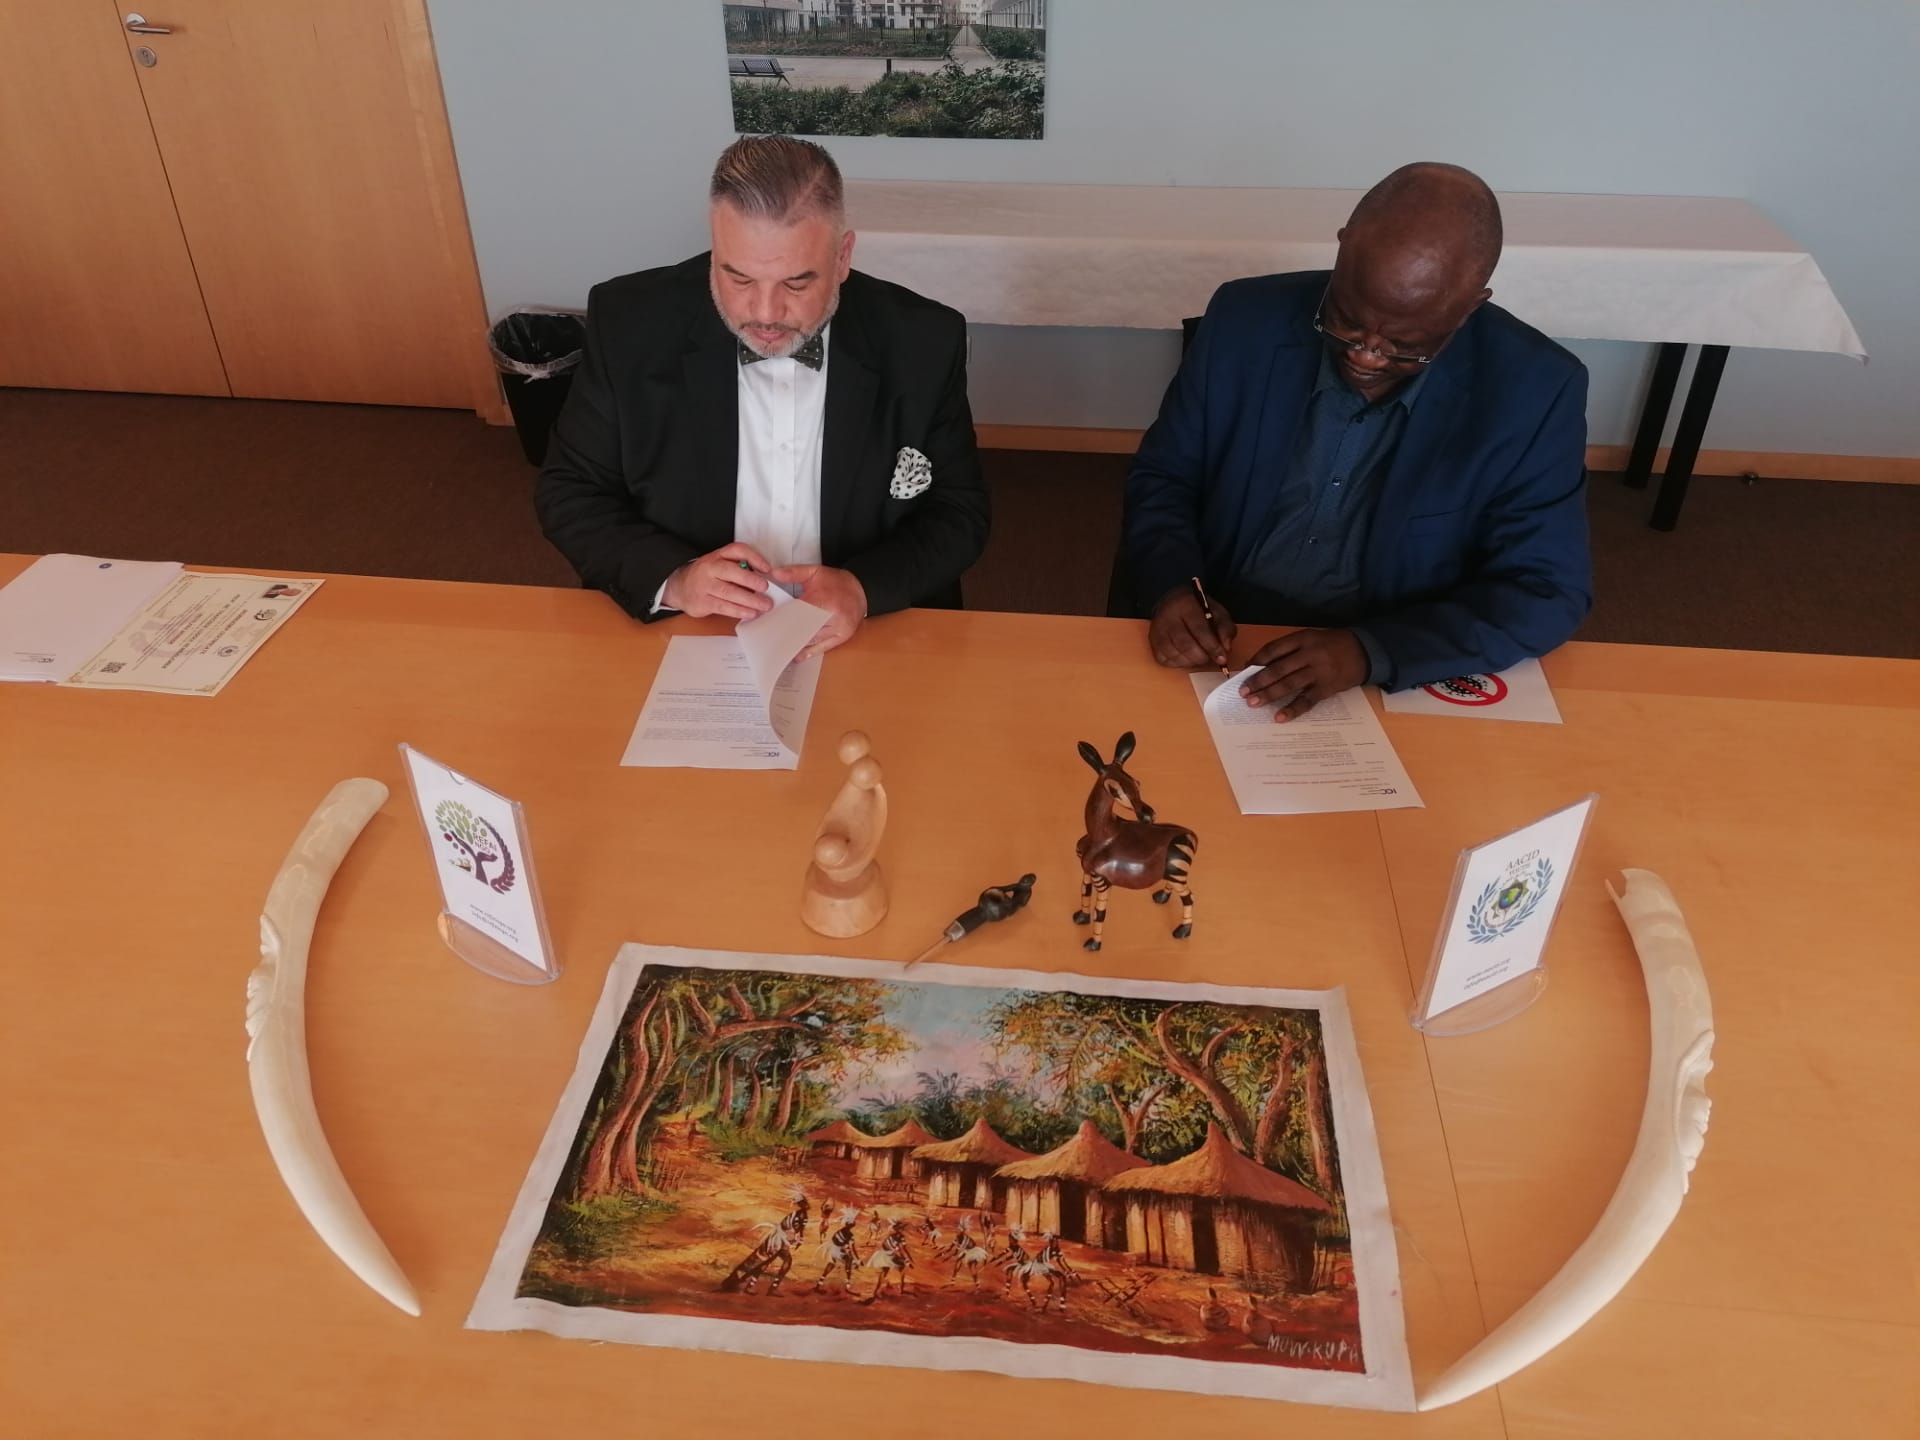 19 of June 2021 signing the Protocol of Cooperation between REFAI-NGO &#038; KATOPA Sarlu for developing projects in DRC